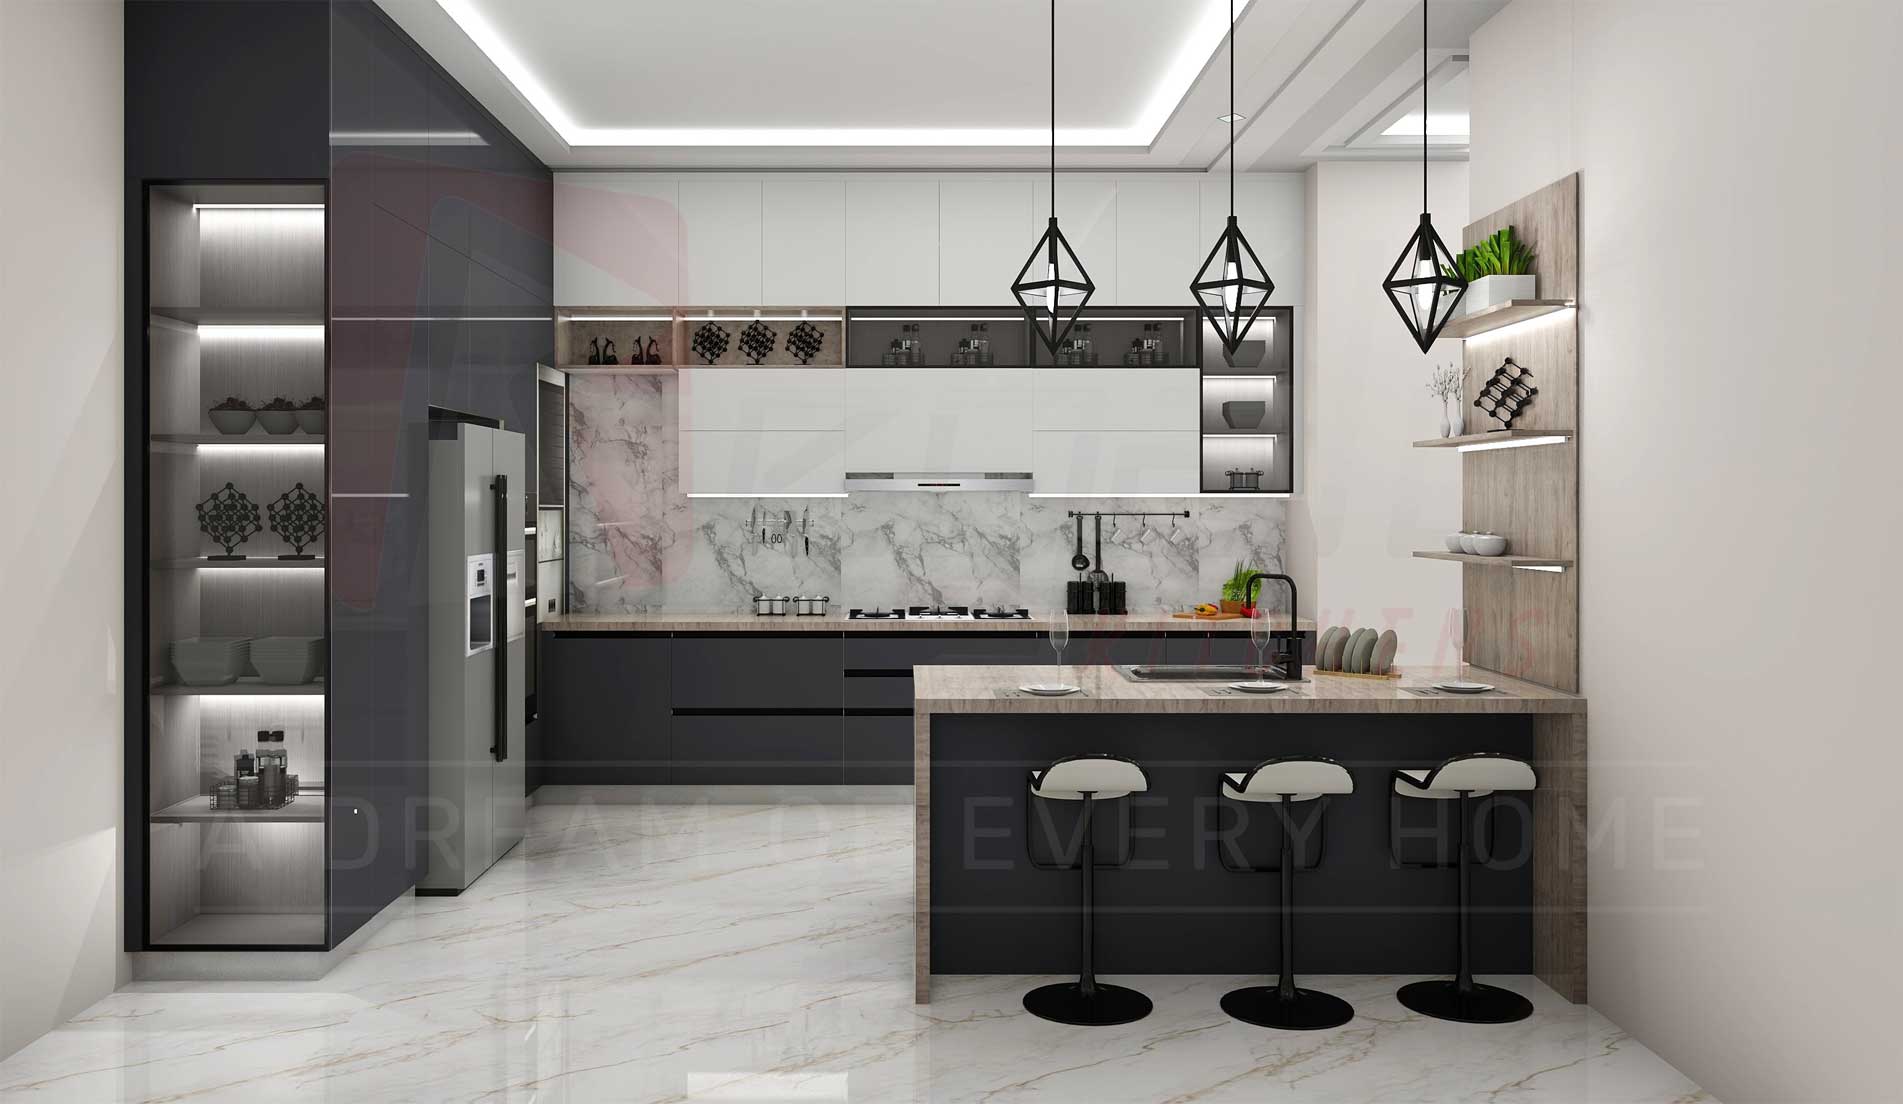 The Impact of Modular Kitchen Design on Cooking